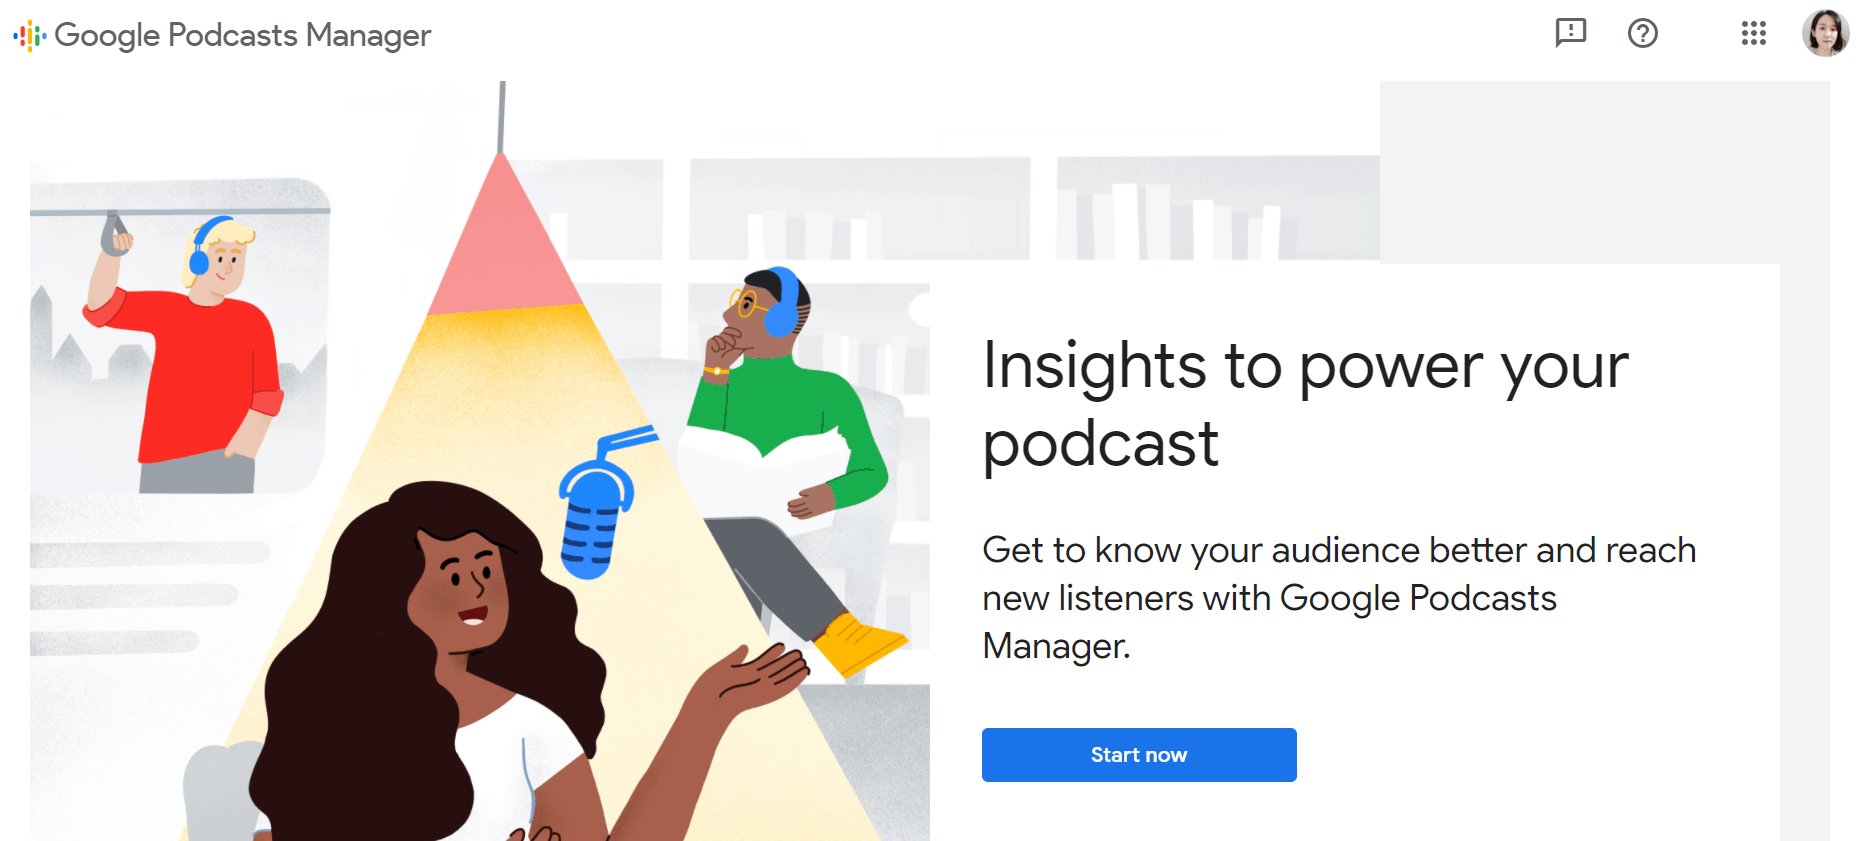 Google Podcasts Manager